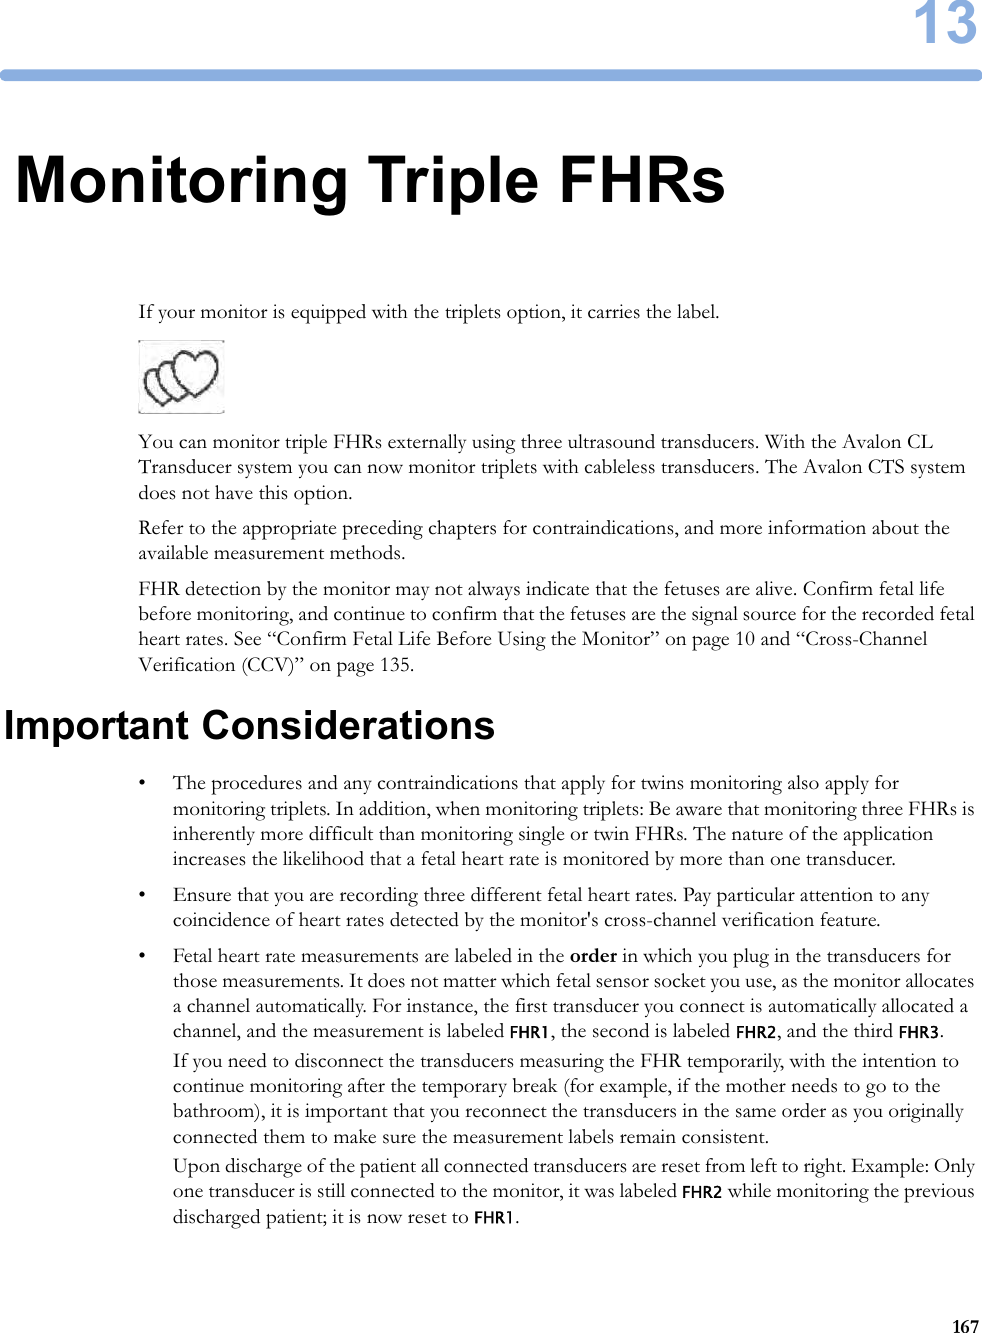 1316713Monitoring Triple FHRsIf your monitor is equipped with the triplets option, it carries the label. You can monitor triple FHRs externally using three ultrasound transducers. With the Avalon CL Transducer system you can now monitor triplets with cableless transducers. The Avalon CTS system does not have this option.Refer to the appropriate preceding chapters for contraindications, and more information about the available measurement methods.FHR detection by the monitor may not always indicate that the fetuses are alive. Confirm fetal life before monitoring, and continue to confirm that the fetuses are the signal source for the recorded fetal heart rates. See “Confirm Fetal Life Before Using the Monitor” on page 10 and “Cross-Channel Verification (CCV)” on page 135.Important Considerations• The procedures and any contraindications that apply for twins monitoring also apply for monitoring triplets. In addition, when monitoring triplets: Be aware that monitoring three FHRs is inherently more difficult than monitoring single or twin FHRs. The nature of the application increases the likelihood that a fetal heart rate is monitored by more than one transducer.• Ensure that you are recording three different fetal heart rates. Pay particular attention to any coincidence of heart rates detected by the monitor&apos;s cross-channel verification feature.• Fetal heart rate measurements are labeled in the order in which you plug in the transducers for those measurements. It does not matter which fetal sensor socket you use, as the monitor allocates a channel automatically. For instance, the first transducer you connect is automatically allocated a channel, and the measurement is labeled FHR1, the second is labeled FHR2, and the third FHR3.If you need to disconnect the transducers measuring the FHR temporarily, with the intention to continue monitoring after the temporary break (for example, if the mother needs to go to the bathroom), it is important that you reconnect the transducers in the same order as you originally connected them to make sure the measurement labels remain consistent.Upon discharge of the patient all connected transducers are reset from left to right. Example: Only one transducer is still connected to the monitor, it was labeled FHR2 while monitoring the previous discharged patient; it is now reset to FHR1.